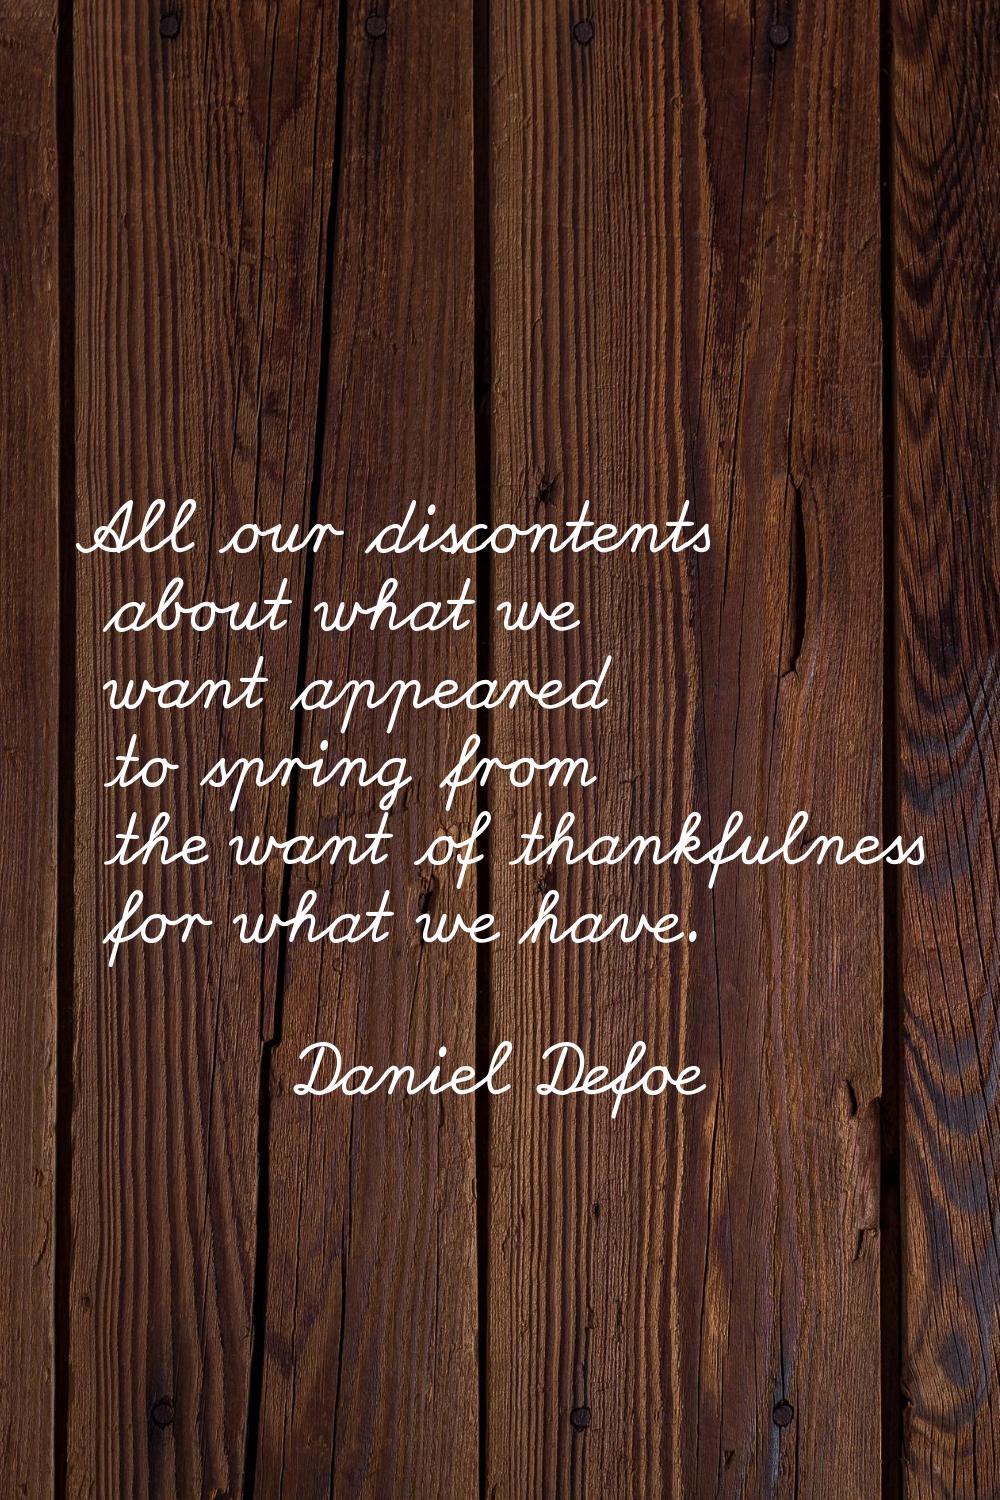 All our discontents about what we want appeared to spring from the want of thankfulness for what we